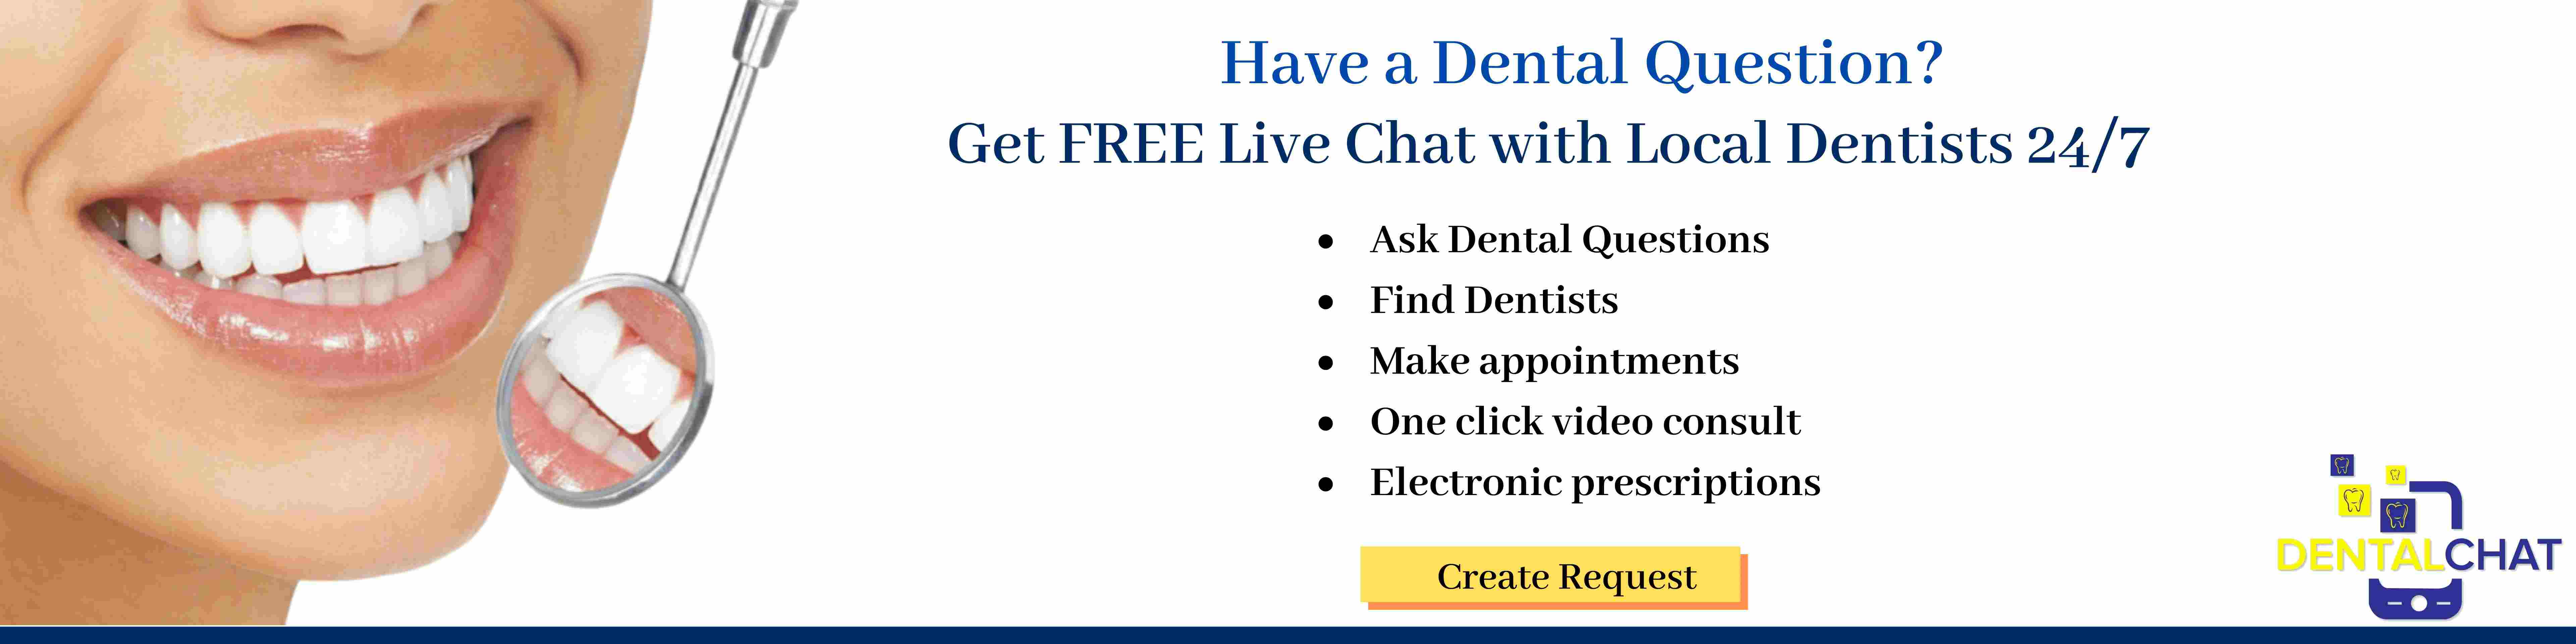 Find Local Dentists, Dental Practice Directory, Become a Local Teledentist, and Tele Dental Office info.